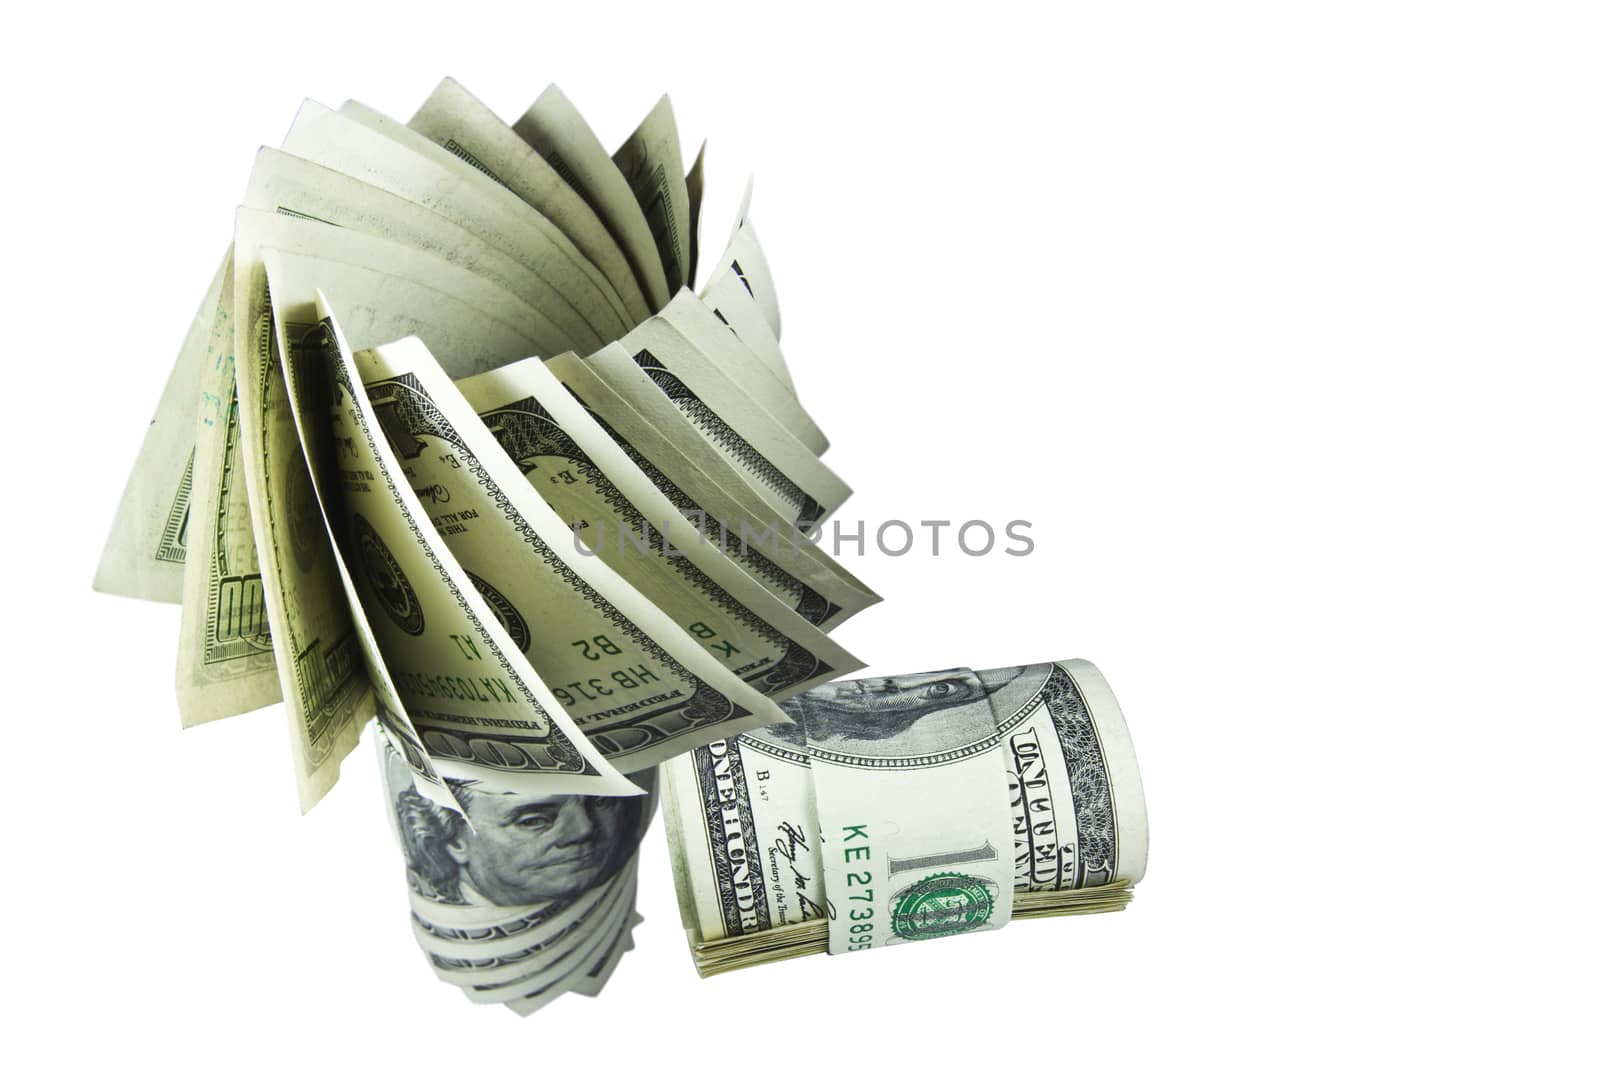 The money hundred dollar bills of American with white background